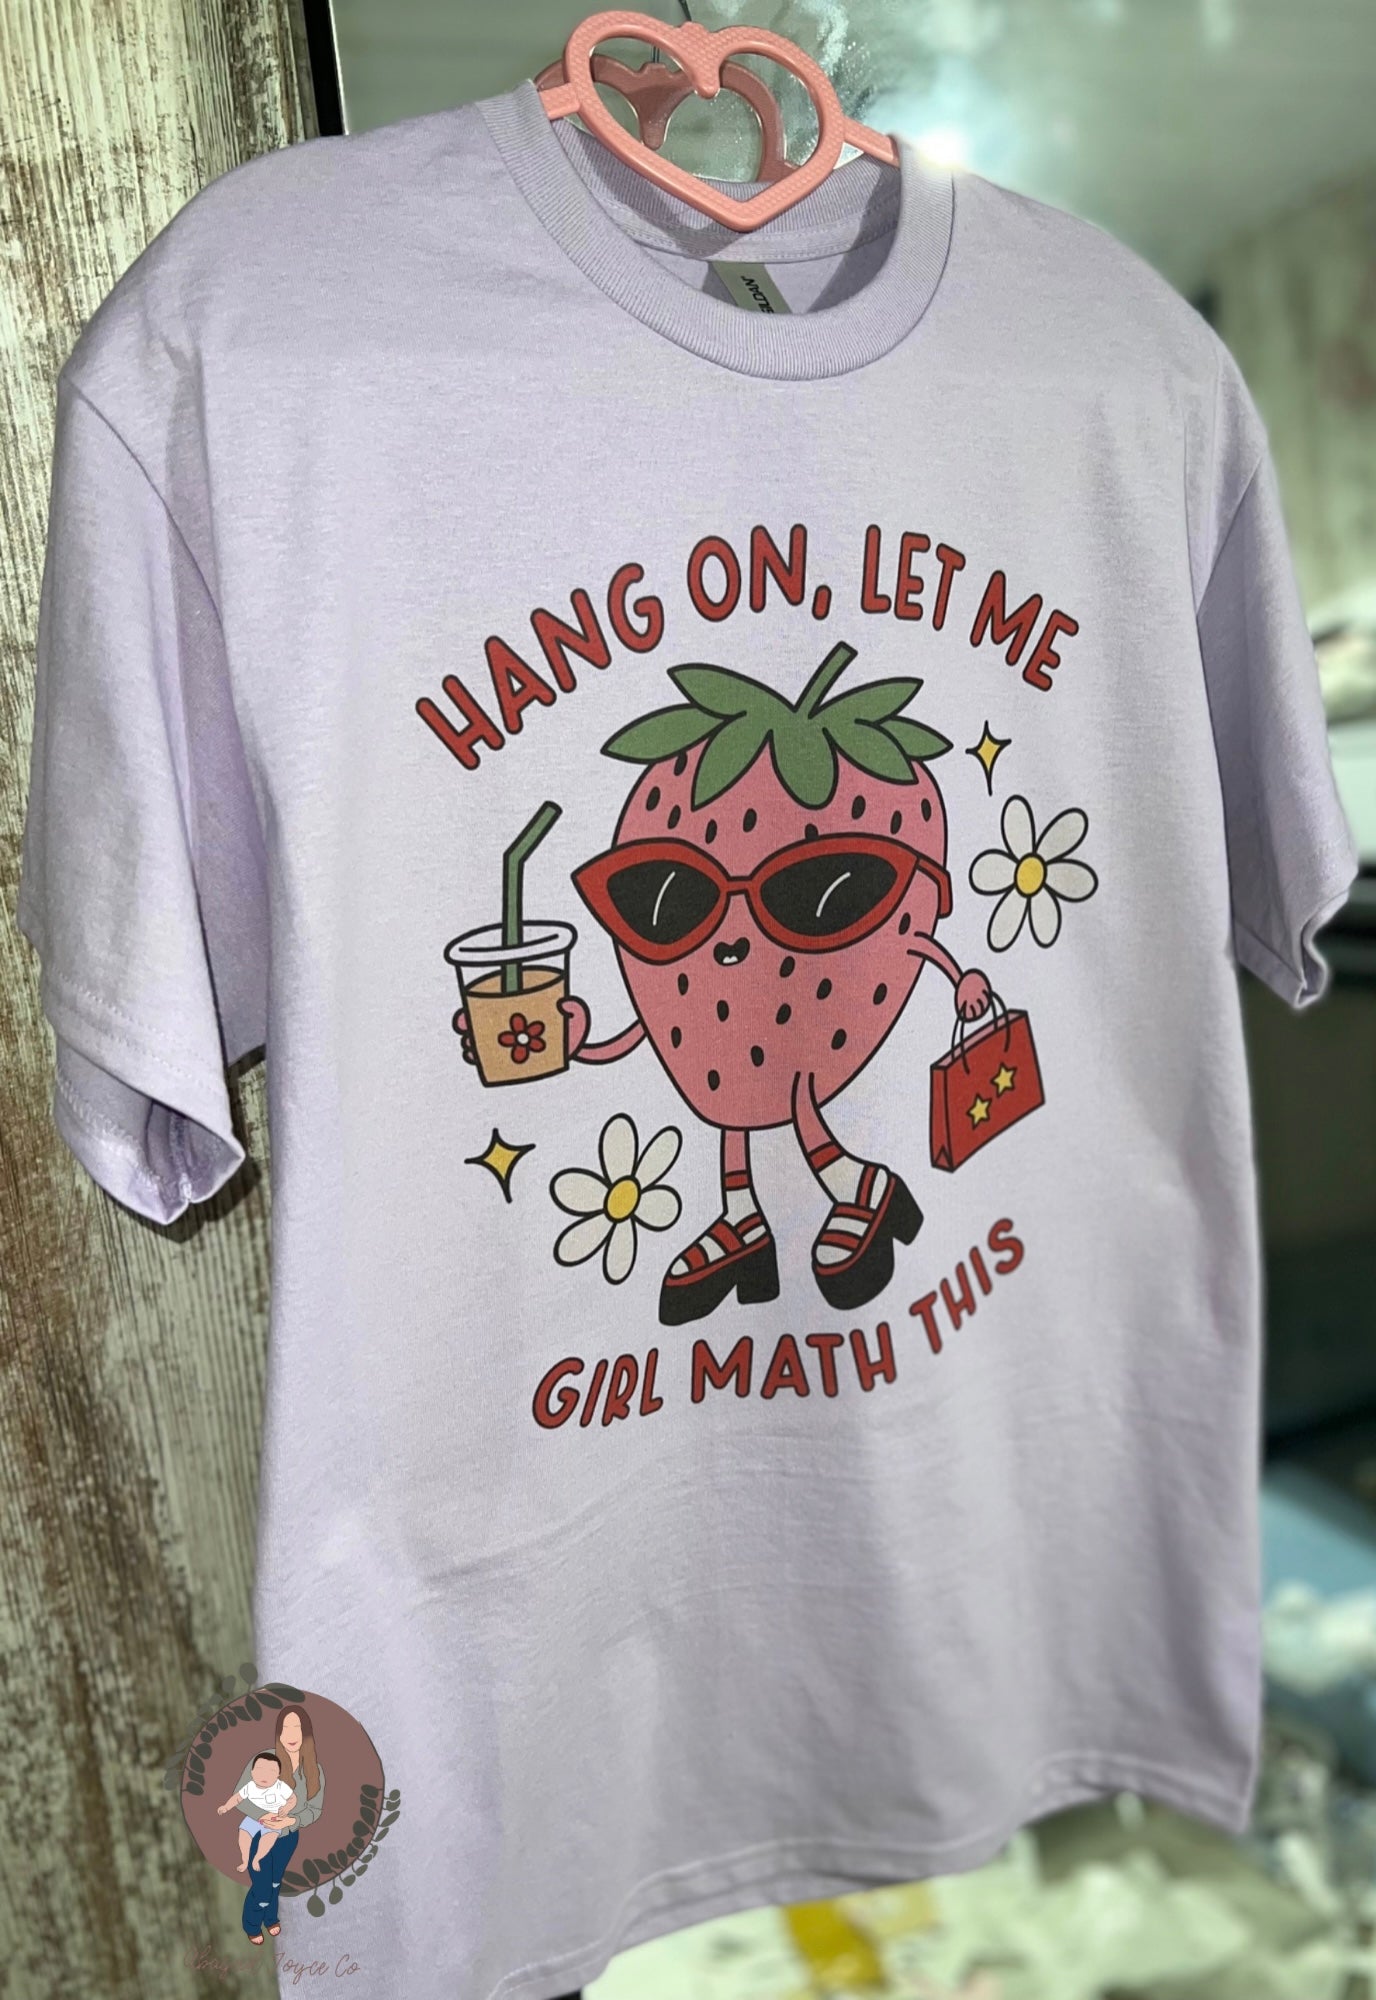 Girl math 🍓 🥰 preorder 15 business day turn around time